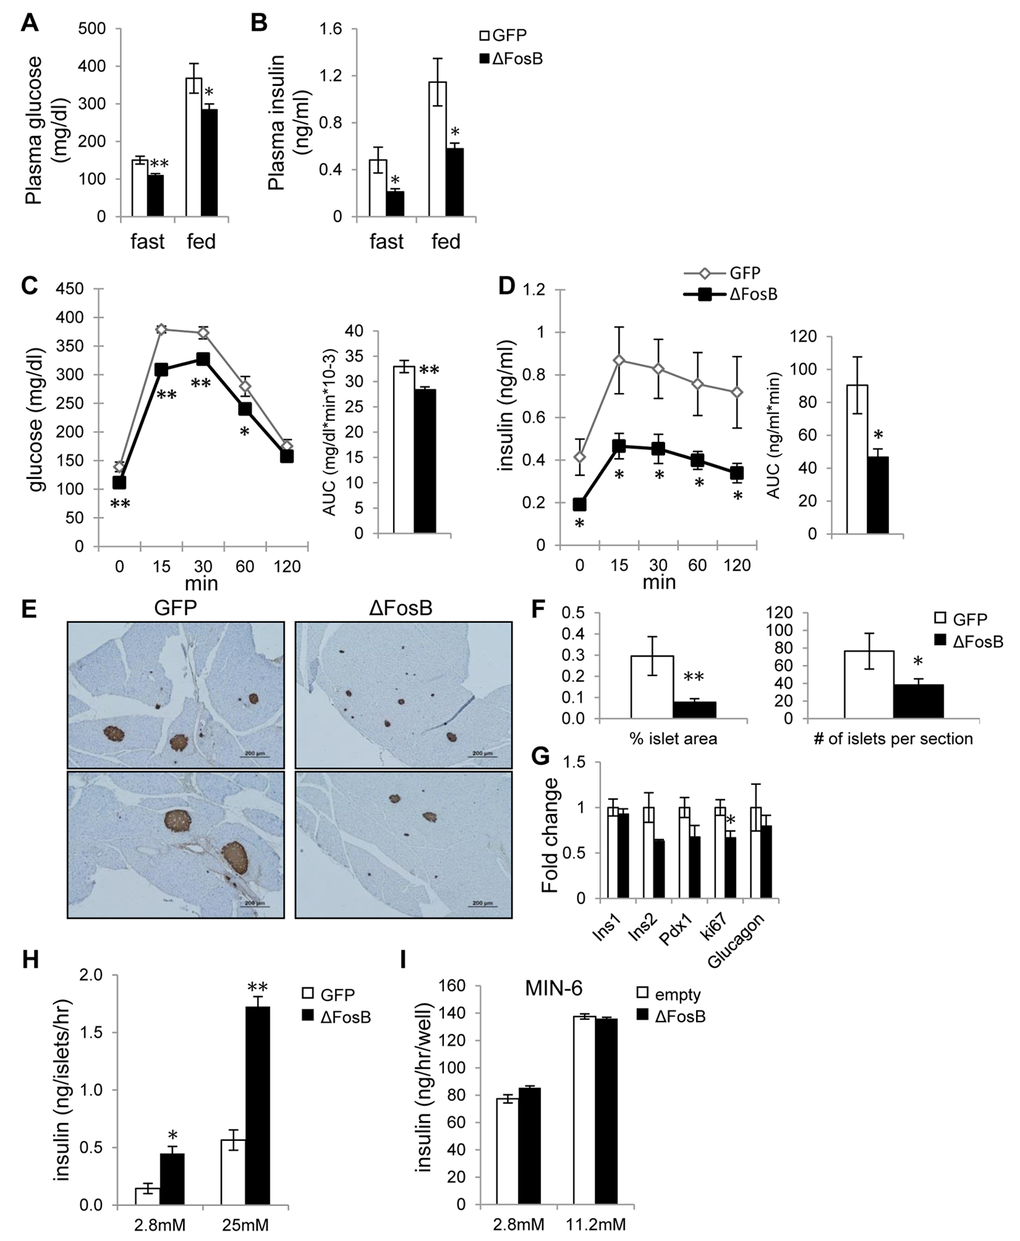 VHT overexpression of ΔFosB improves glucose profile despite lower insulin response. Mice were stereotaxically injected into VHT with AAV-ΔFosB or AAV-GFP and glucose metabolism assessed 8 weeks post-surgically (n=8). (A) Fasted and fed glucose levels (B) Fasted and fed insulin levels (C) GTT glucose (D) GTT insulin (E) Immunostaining of pancreas with anti-insulin antibody. Scale bar; 200μm. (F) Histomorphometry of insulin-stained pancreatic islets (G). qPCR analysis of isolated pancreatic islets. (H) GSIS test of isolated pancreatic islets from AAV-GFP and AAV-ΔFosB mice. (I) GSIS test of MIN-6 cells transfected with ΔFosB. Data are presented as mean ± SEM. *p